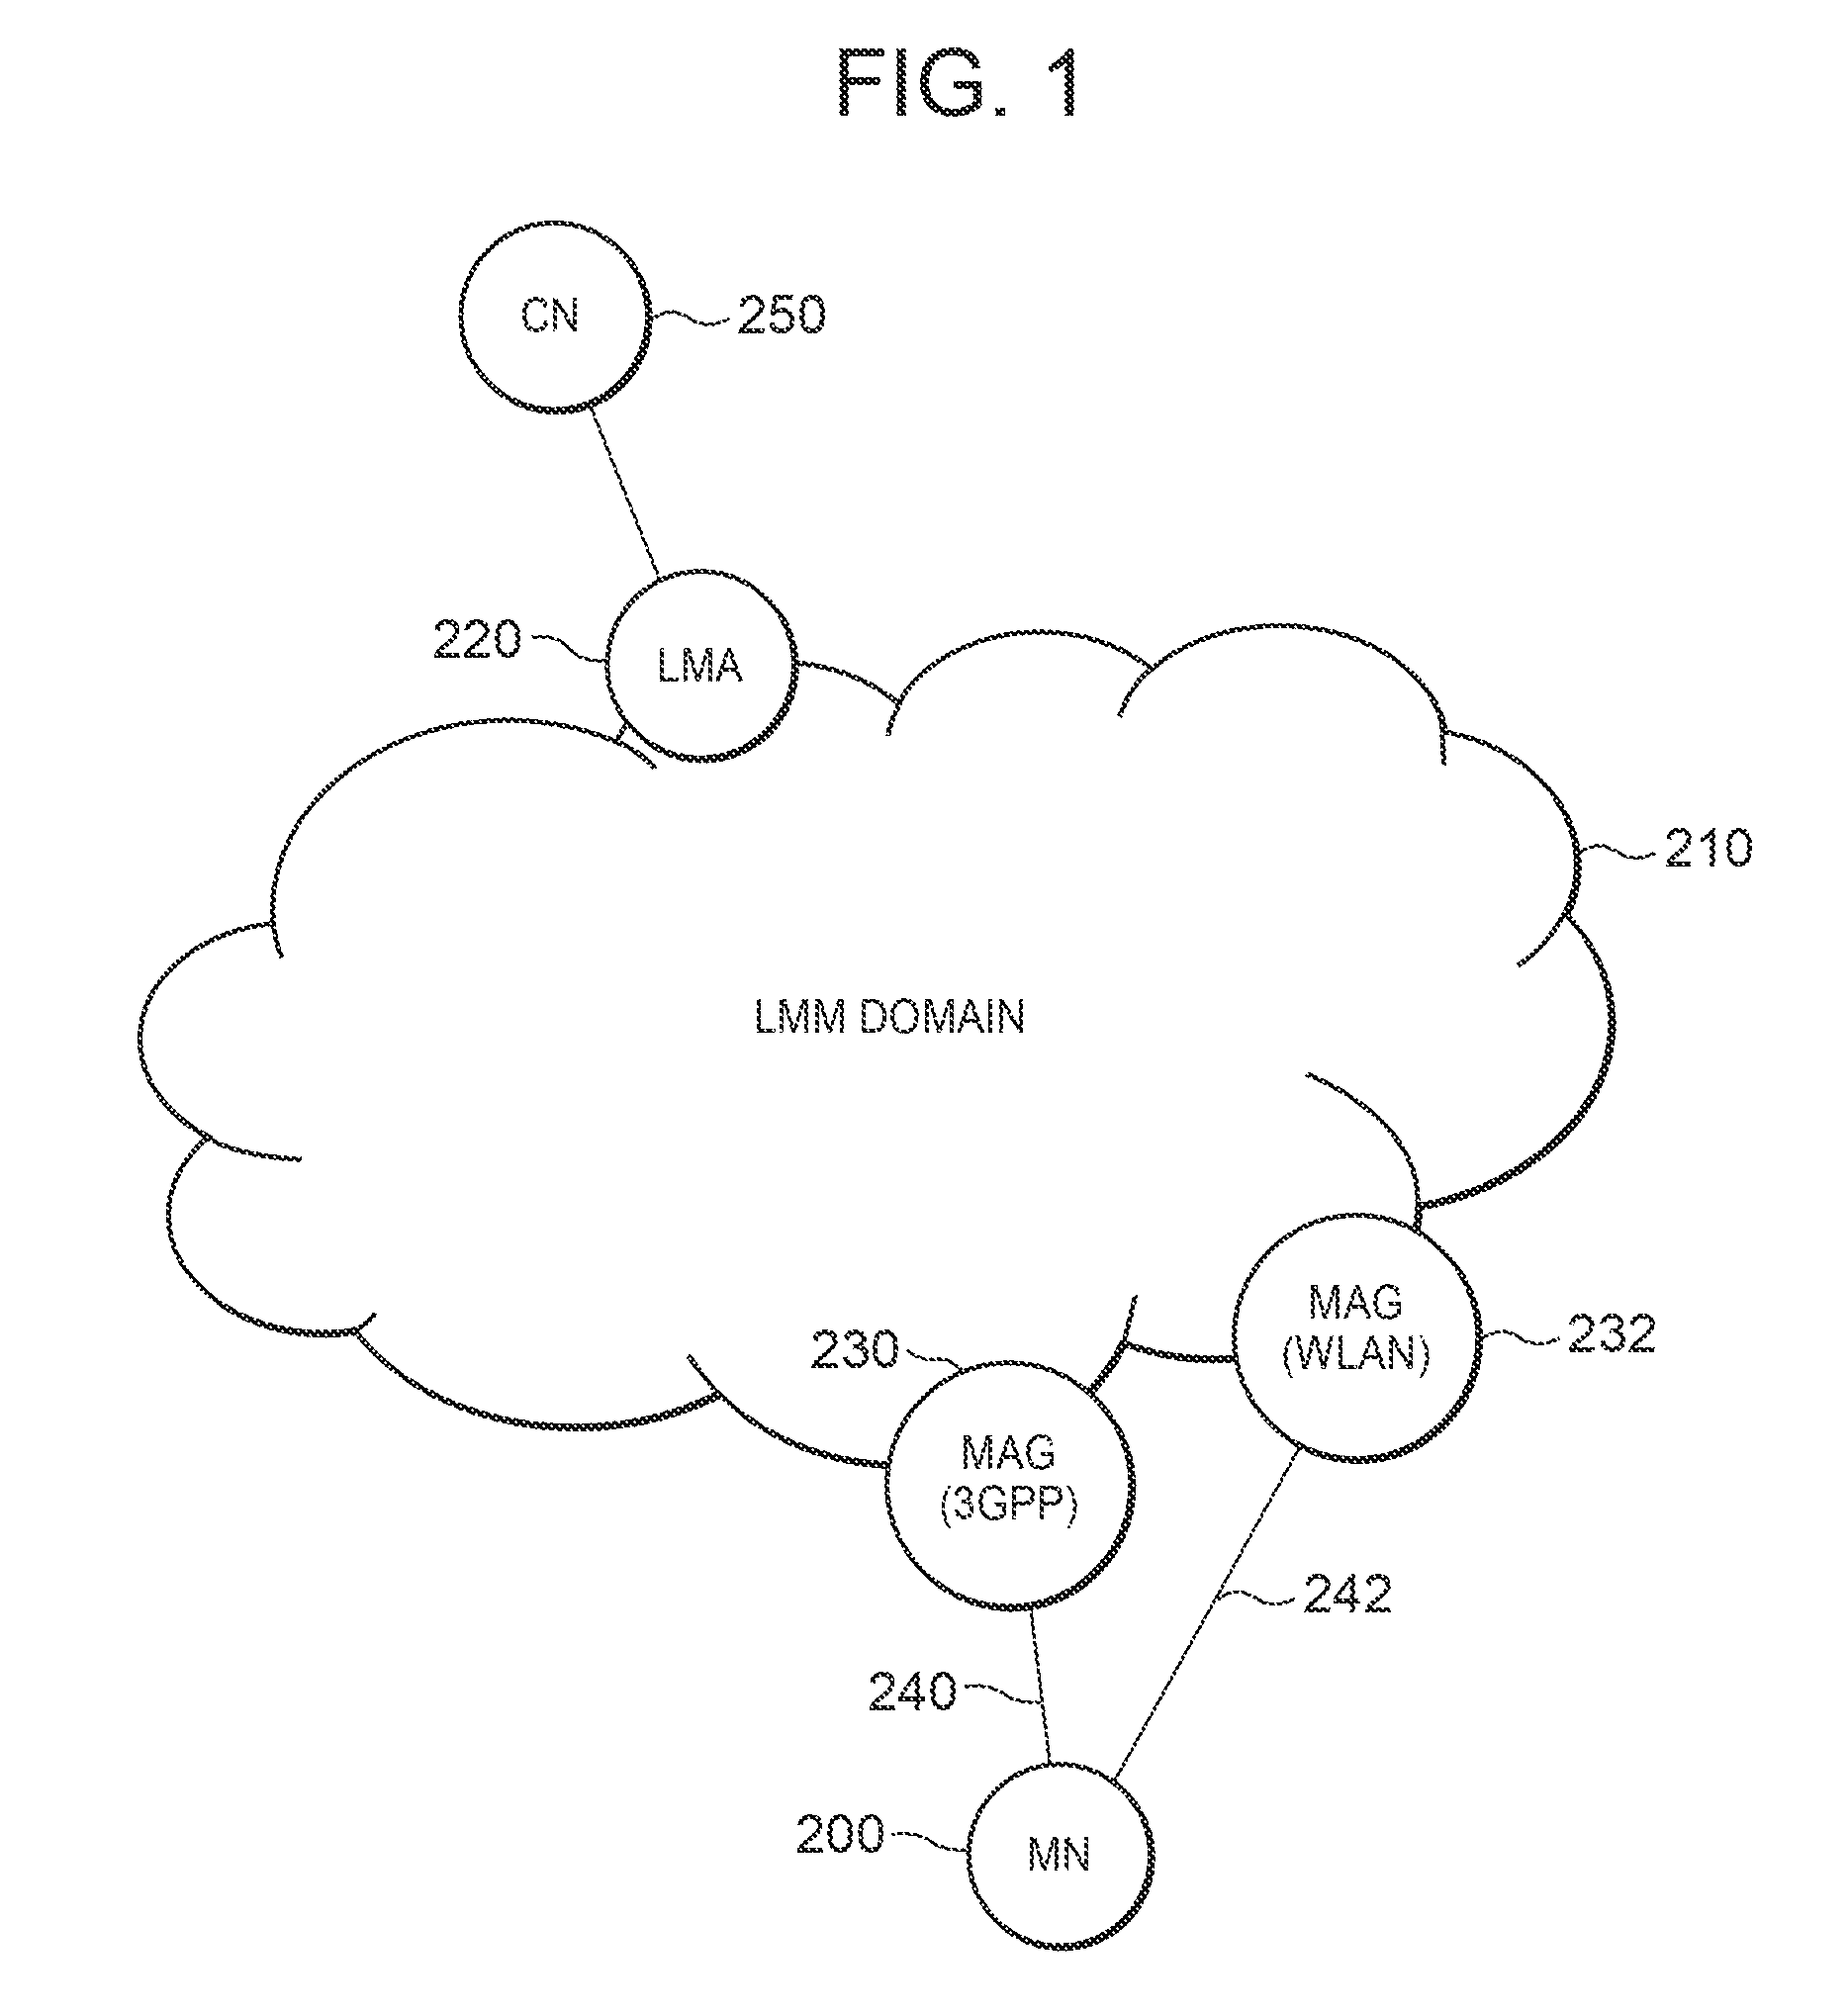 Interface Switching System, Mobile Node, Proxy Node, and Mobile Management Node